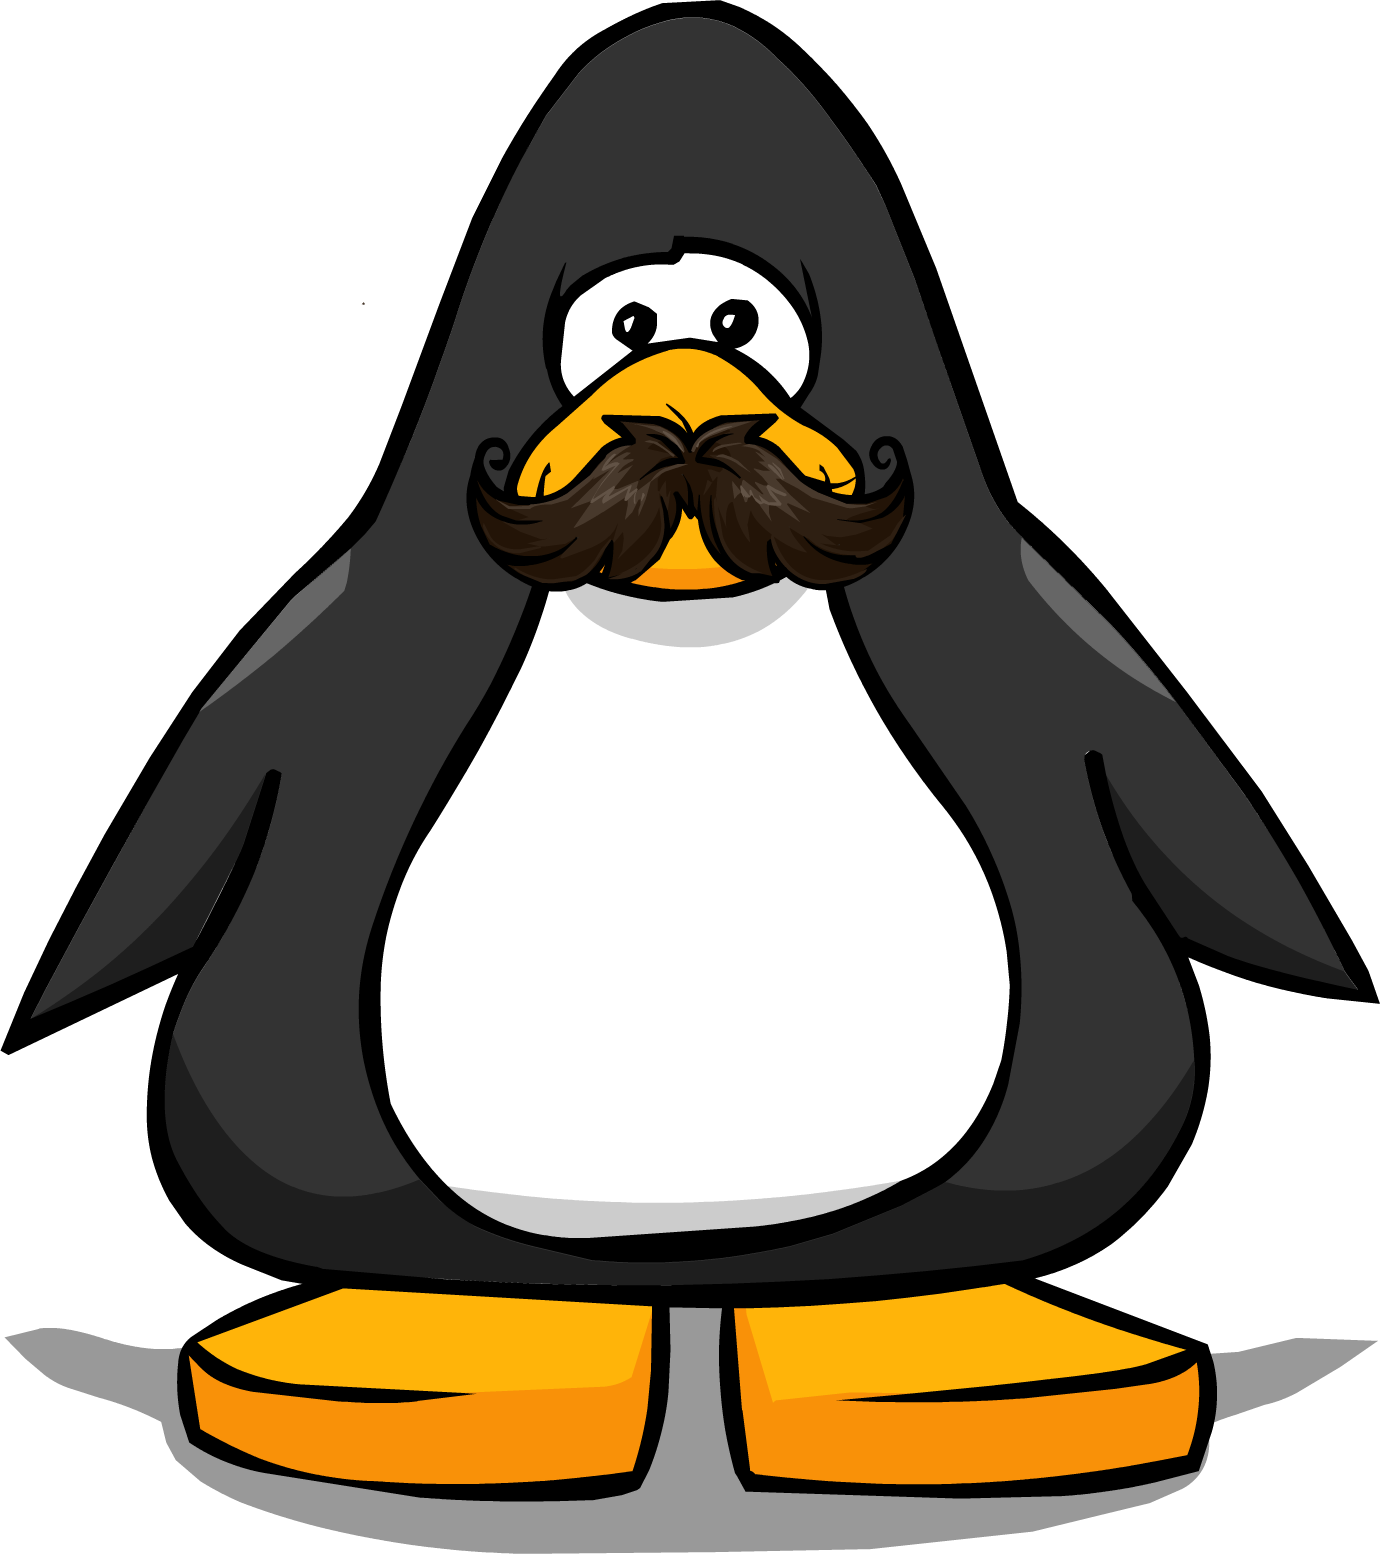 Curly Mustache From A Player Card - Club Penguin Tour Guide Hat (1380x1554)